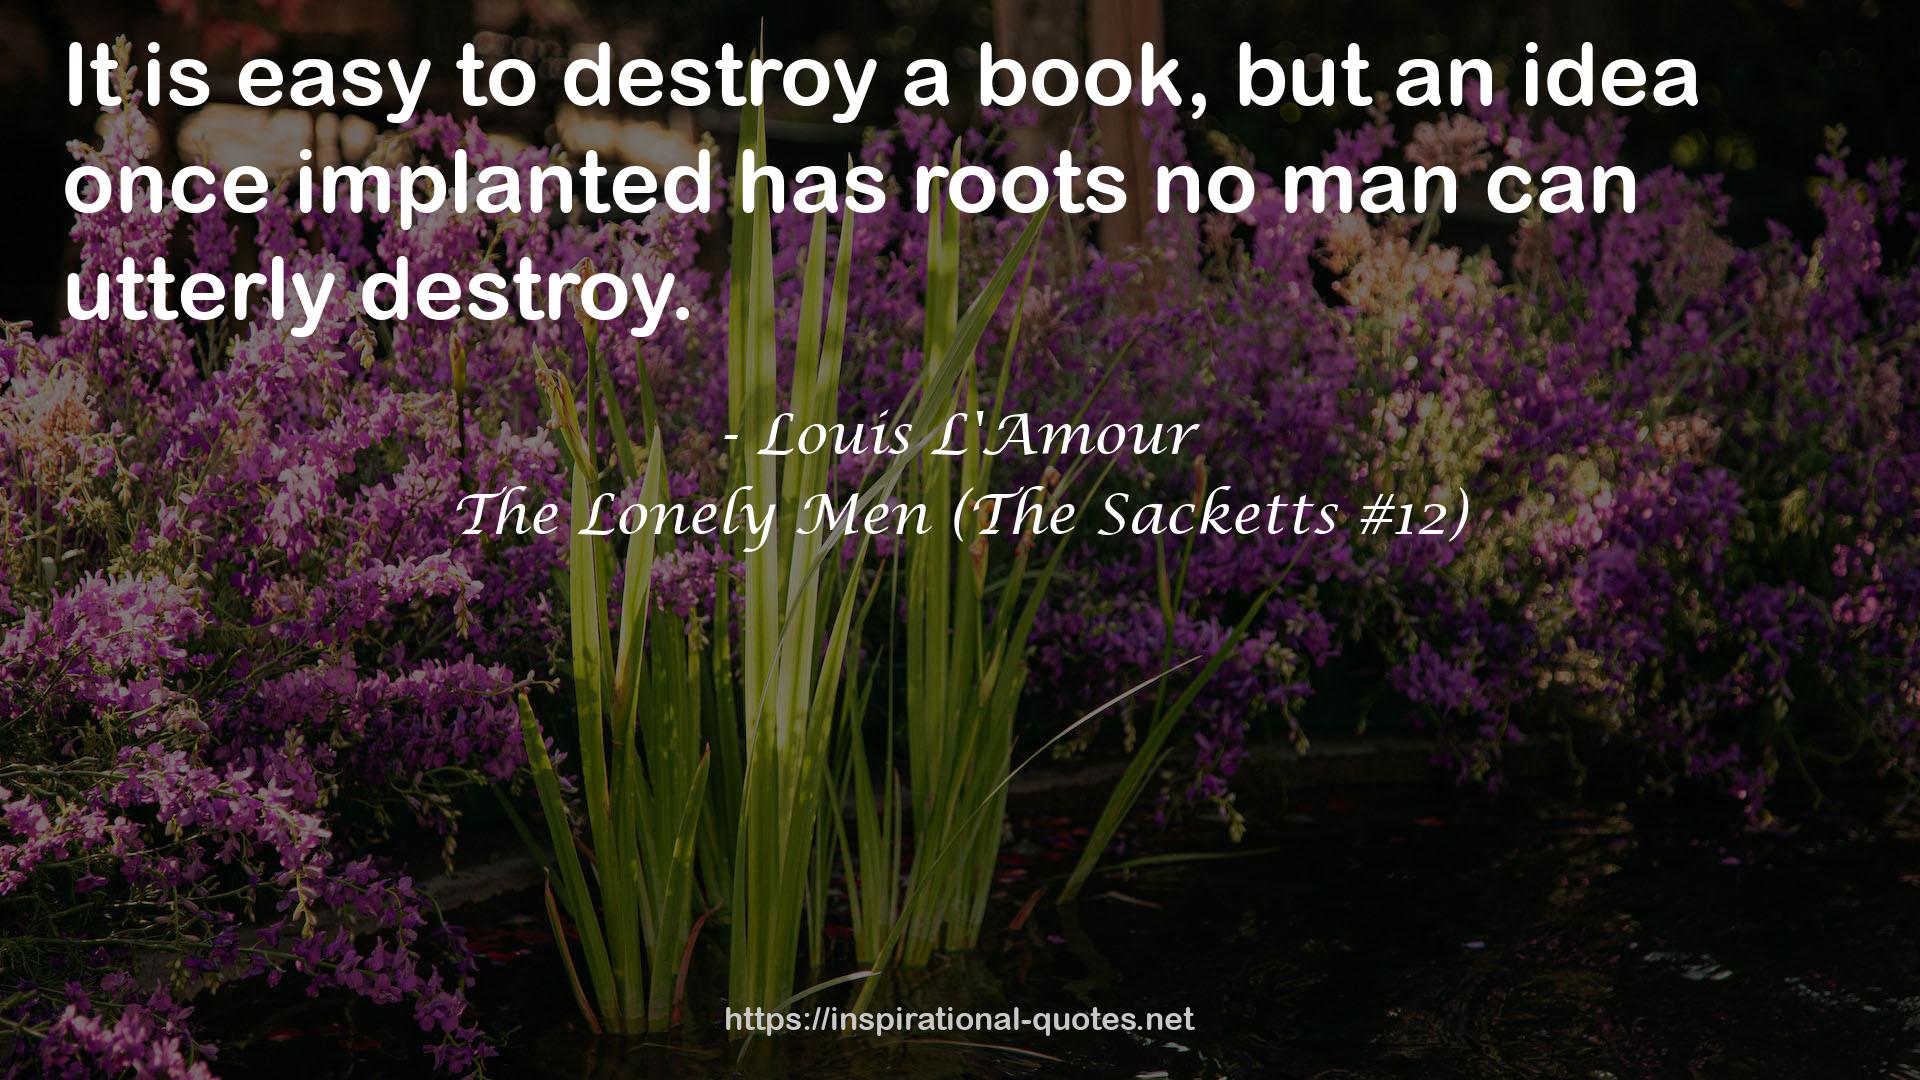 The Lonely Men (The Sacketts #12) QUOTES